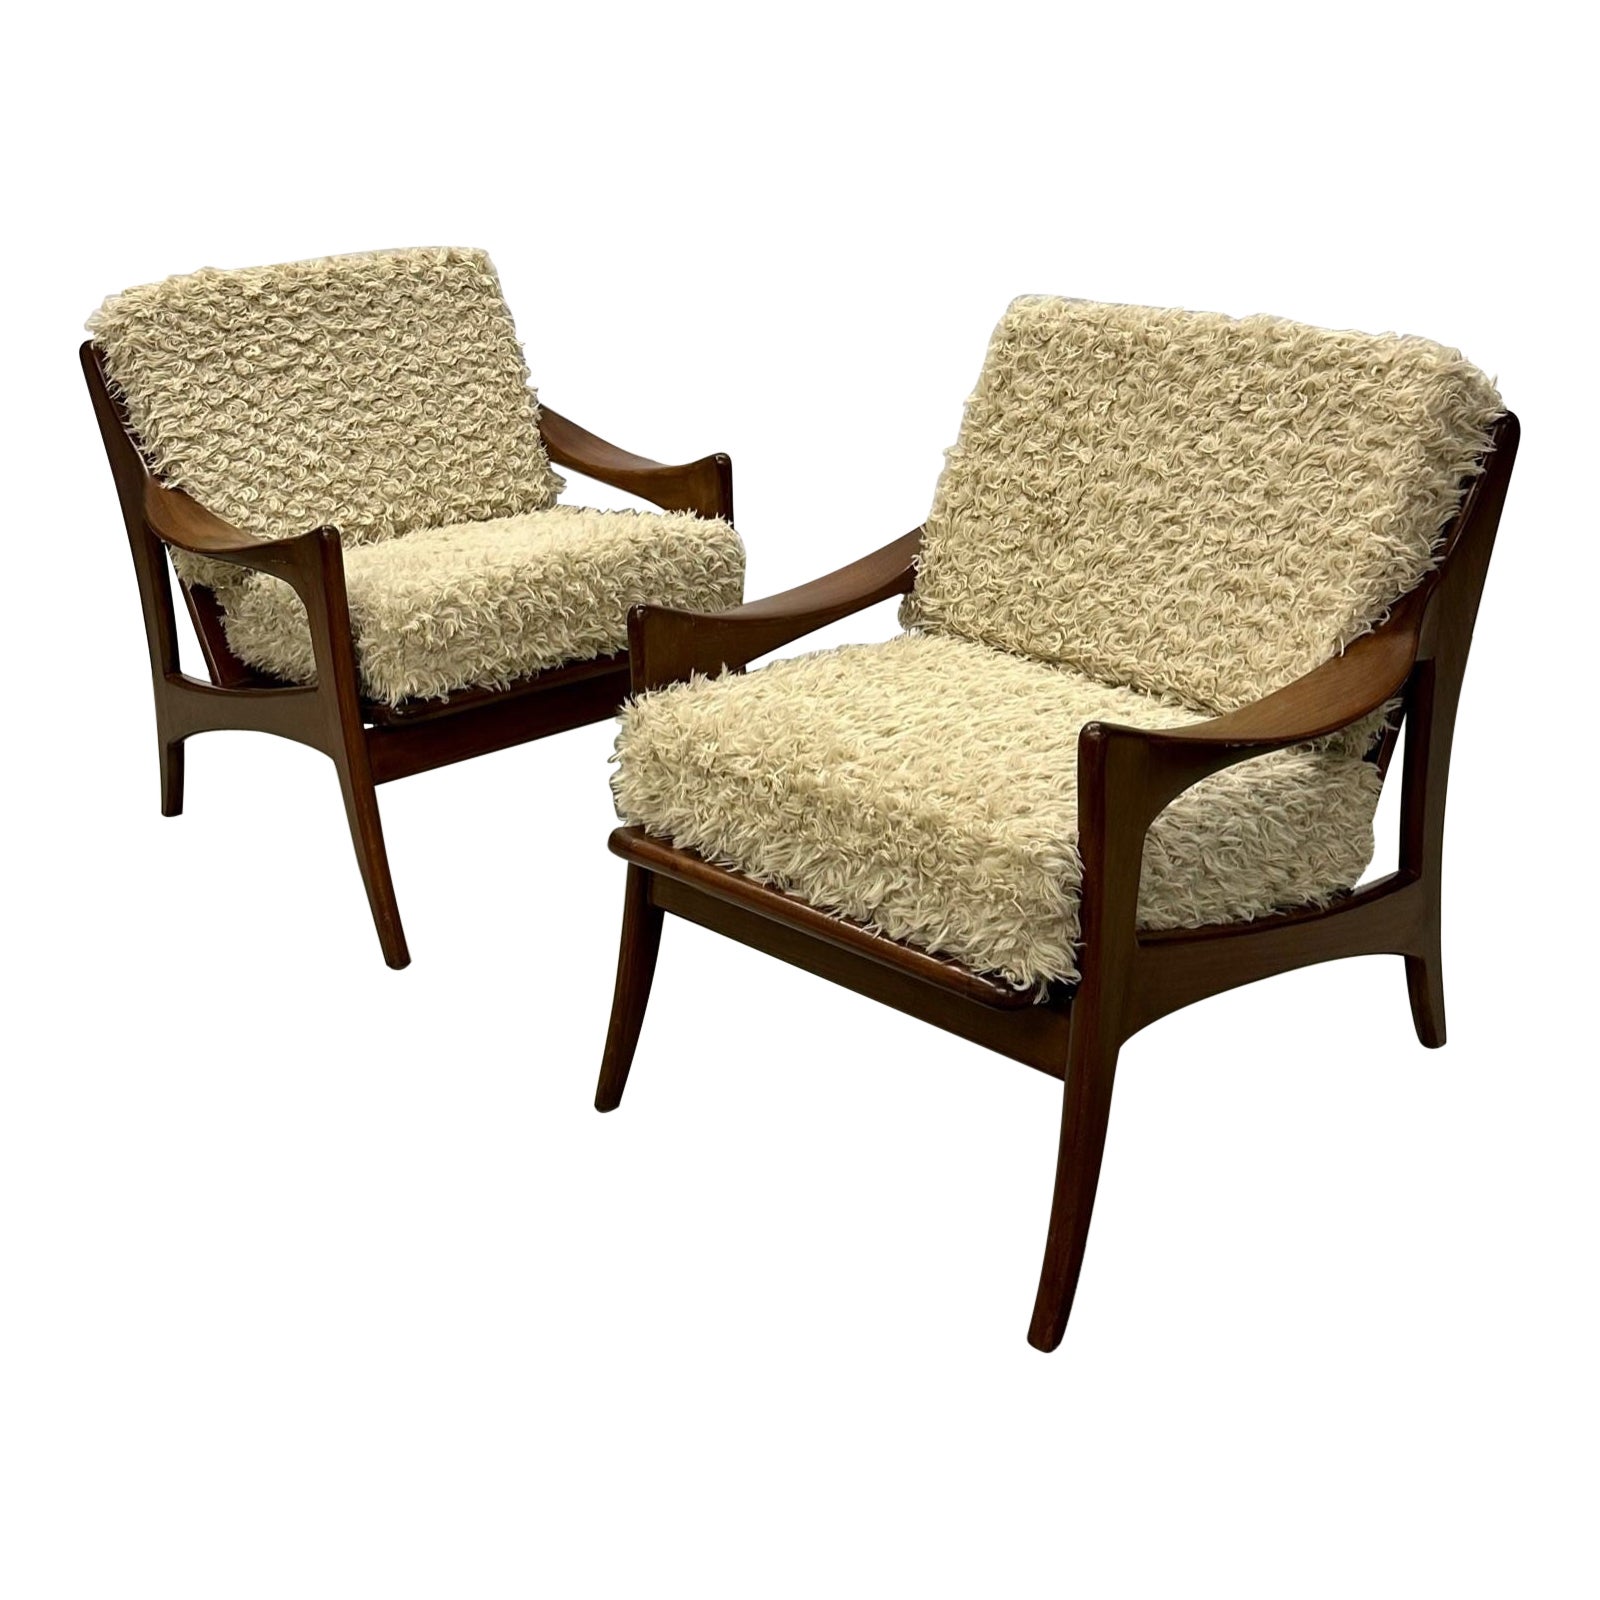 Pair of Dutch Mid-Century Modern Style Arm / Lounge Chairs, Teak, Brass For Sale